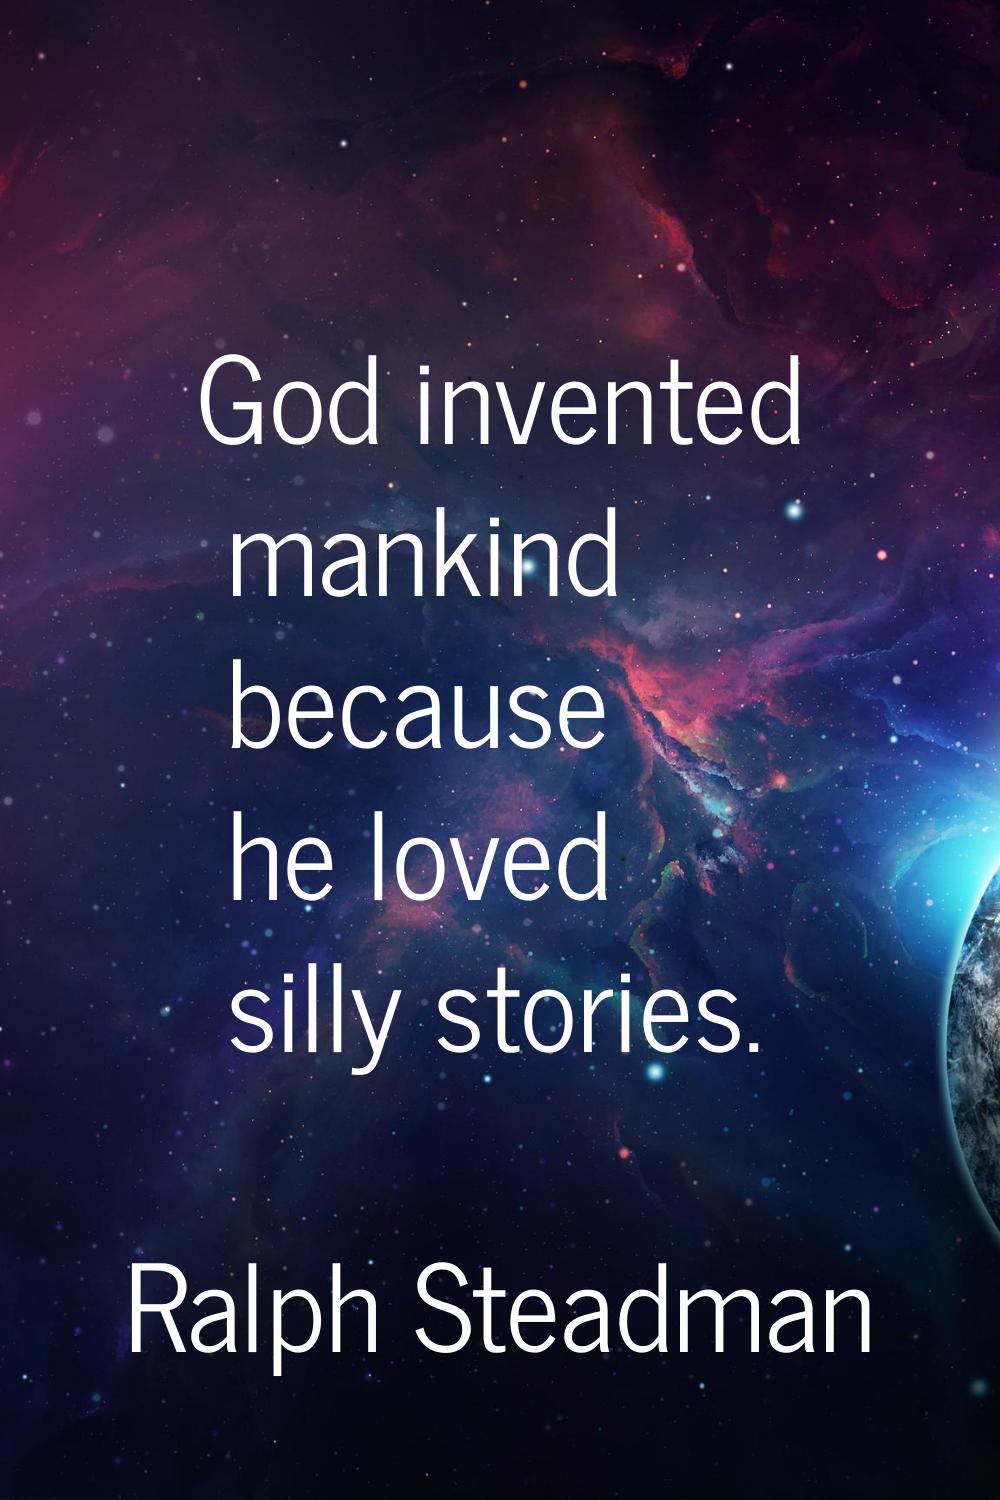 God invented mankind because he loved silly stories.